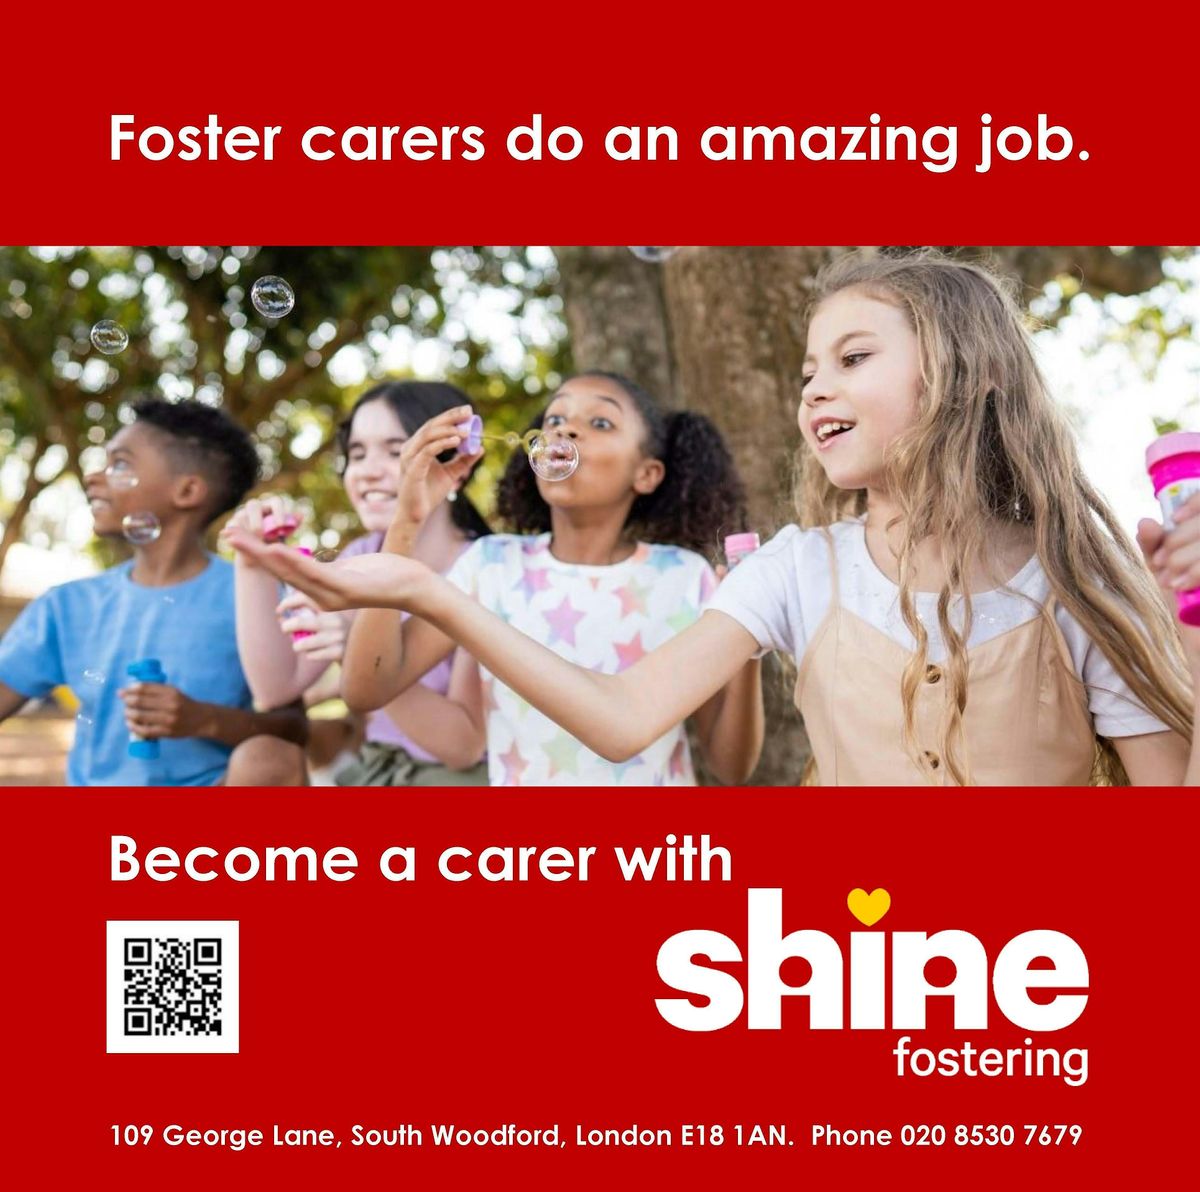 SHINE FOSTERING FRIDAYS are back !